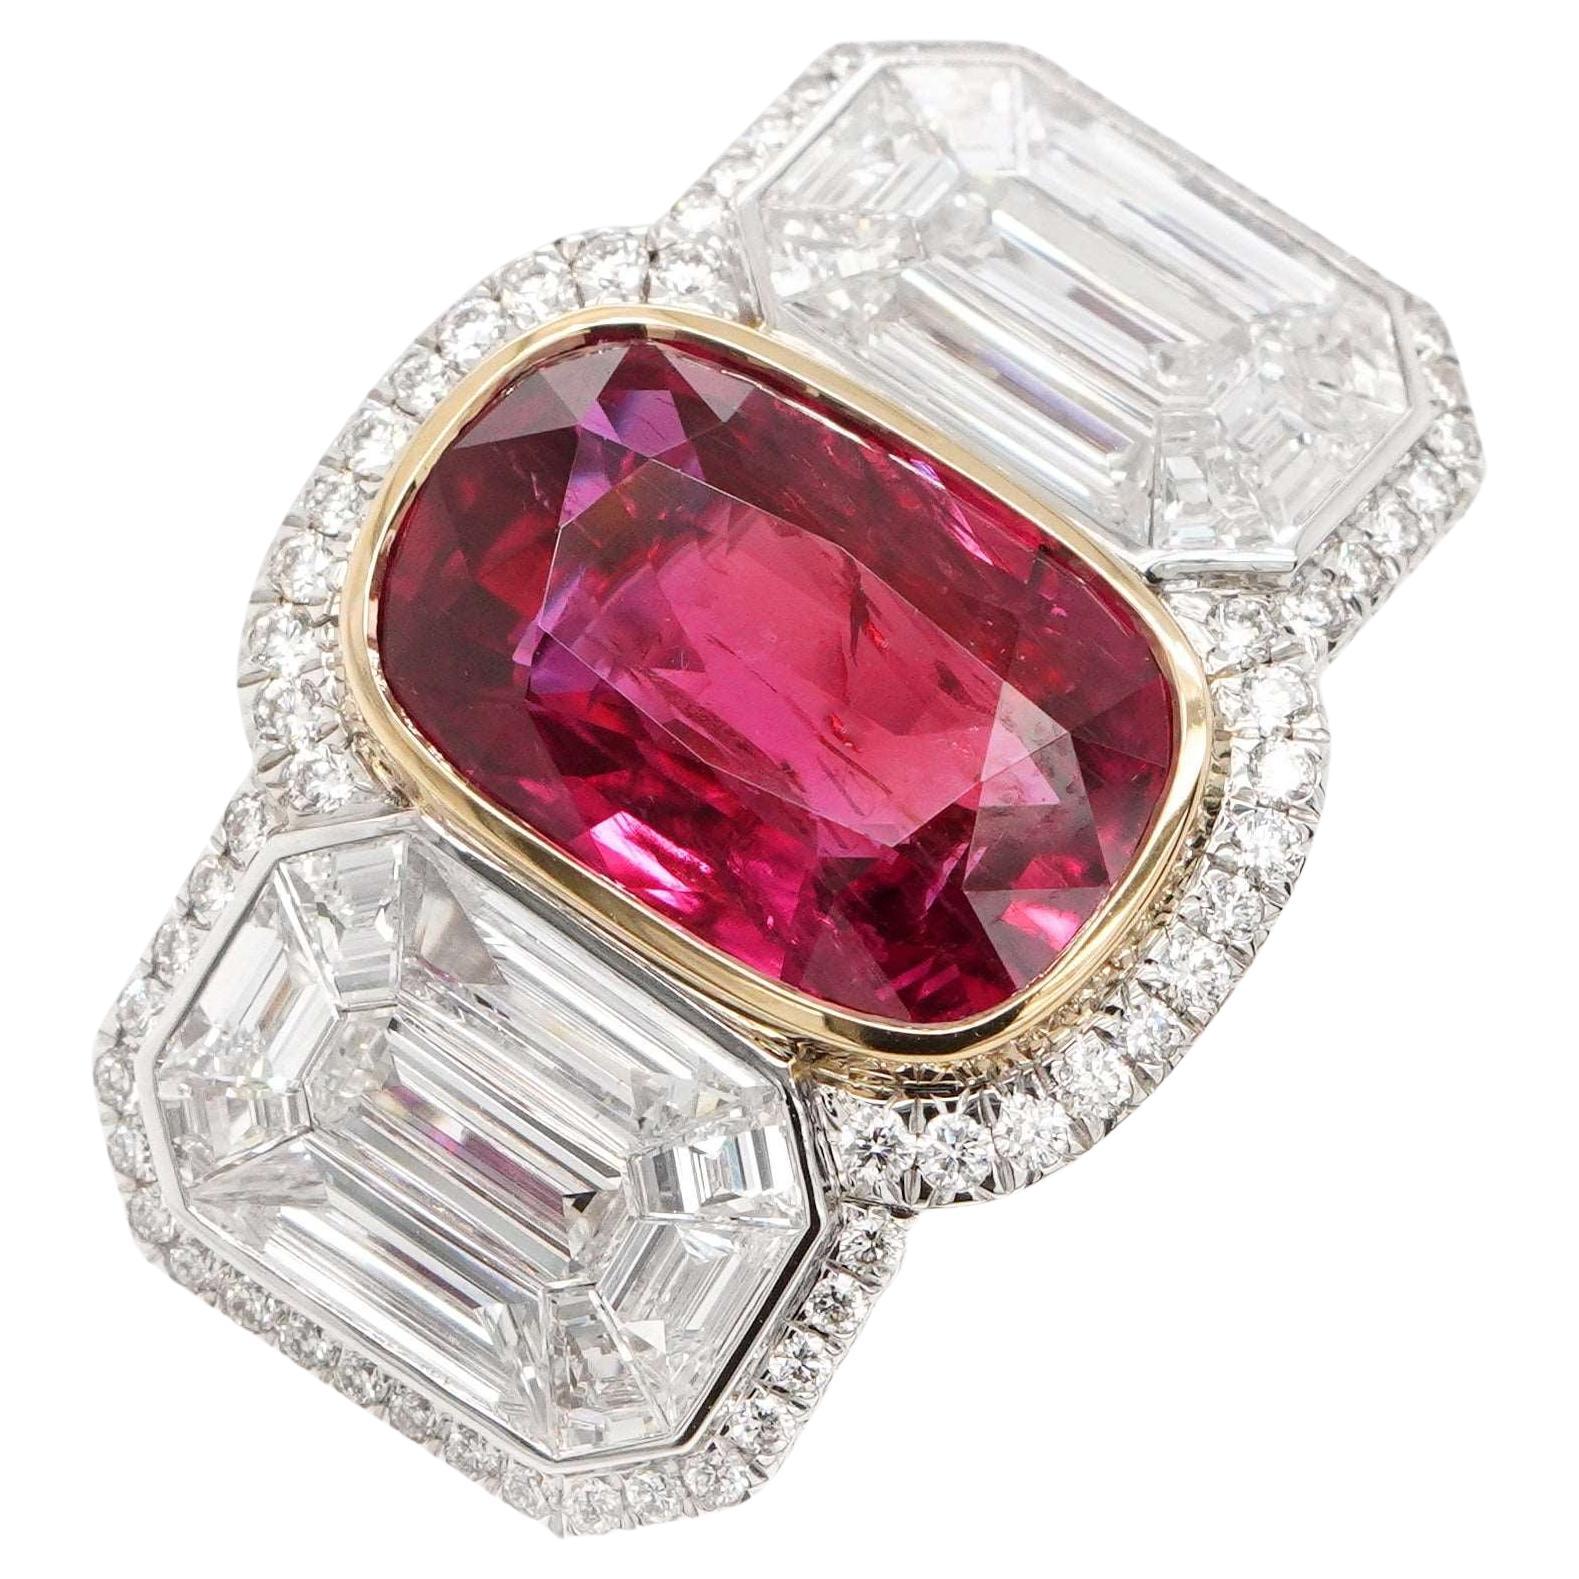 BENJAMIN FINE JEWELRY 5.37 cts Siam Ruby with Pie Cut Diamond 18K Ring For Sale